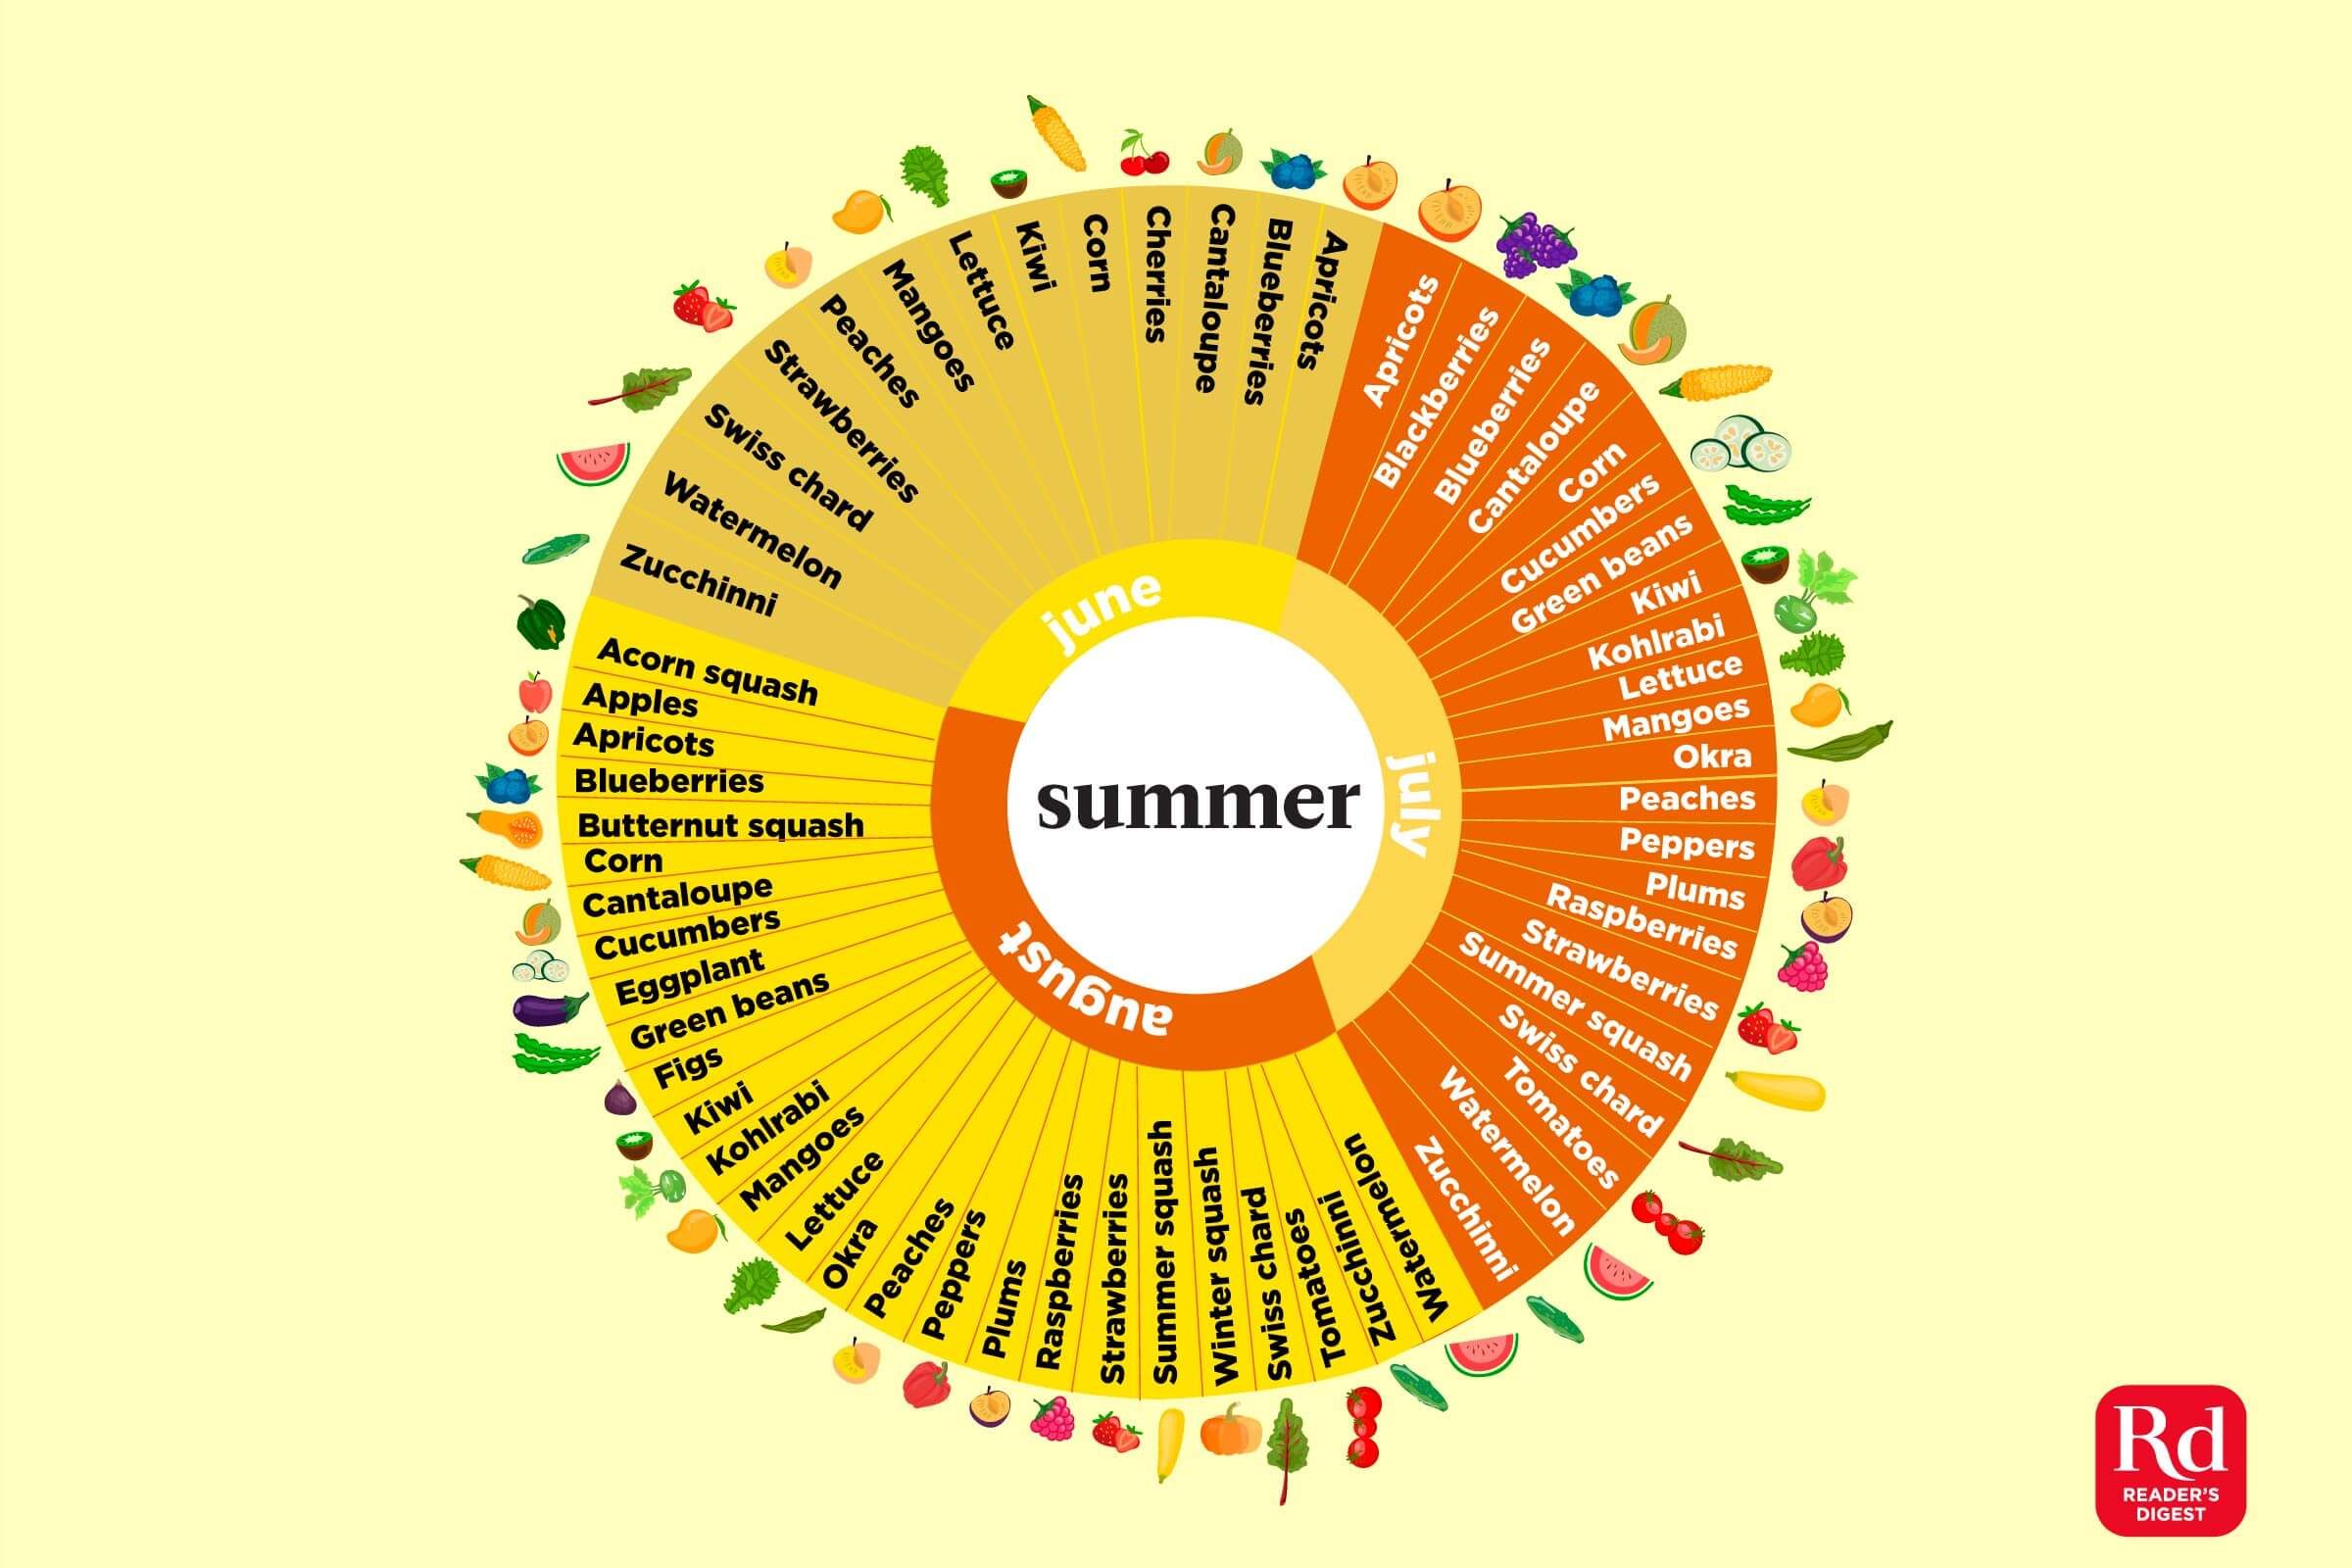 https://www.thehealthy.com/wp-content/uploads/2018/02/02-This-Infographic-Shows-the-Fruits-and-Vegetables-in-Season-Every-Month-of-the-Year.jpg?fit=680%2C454